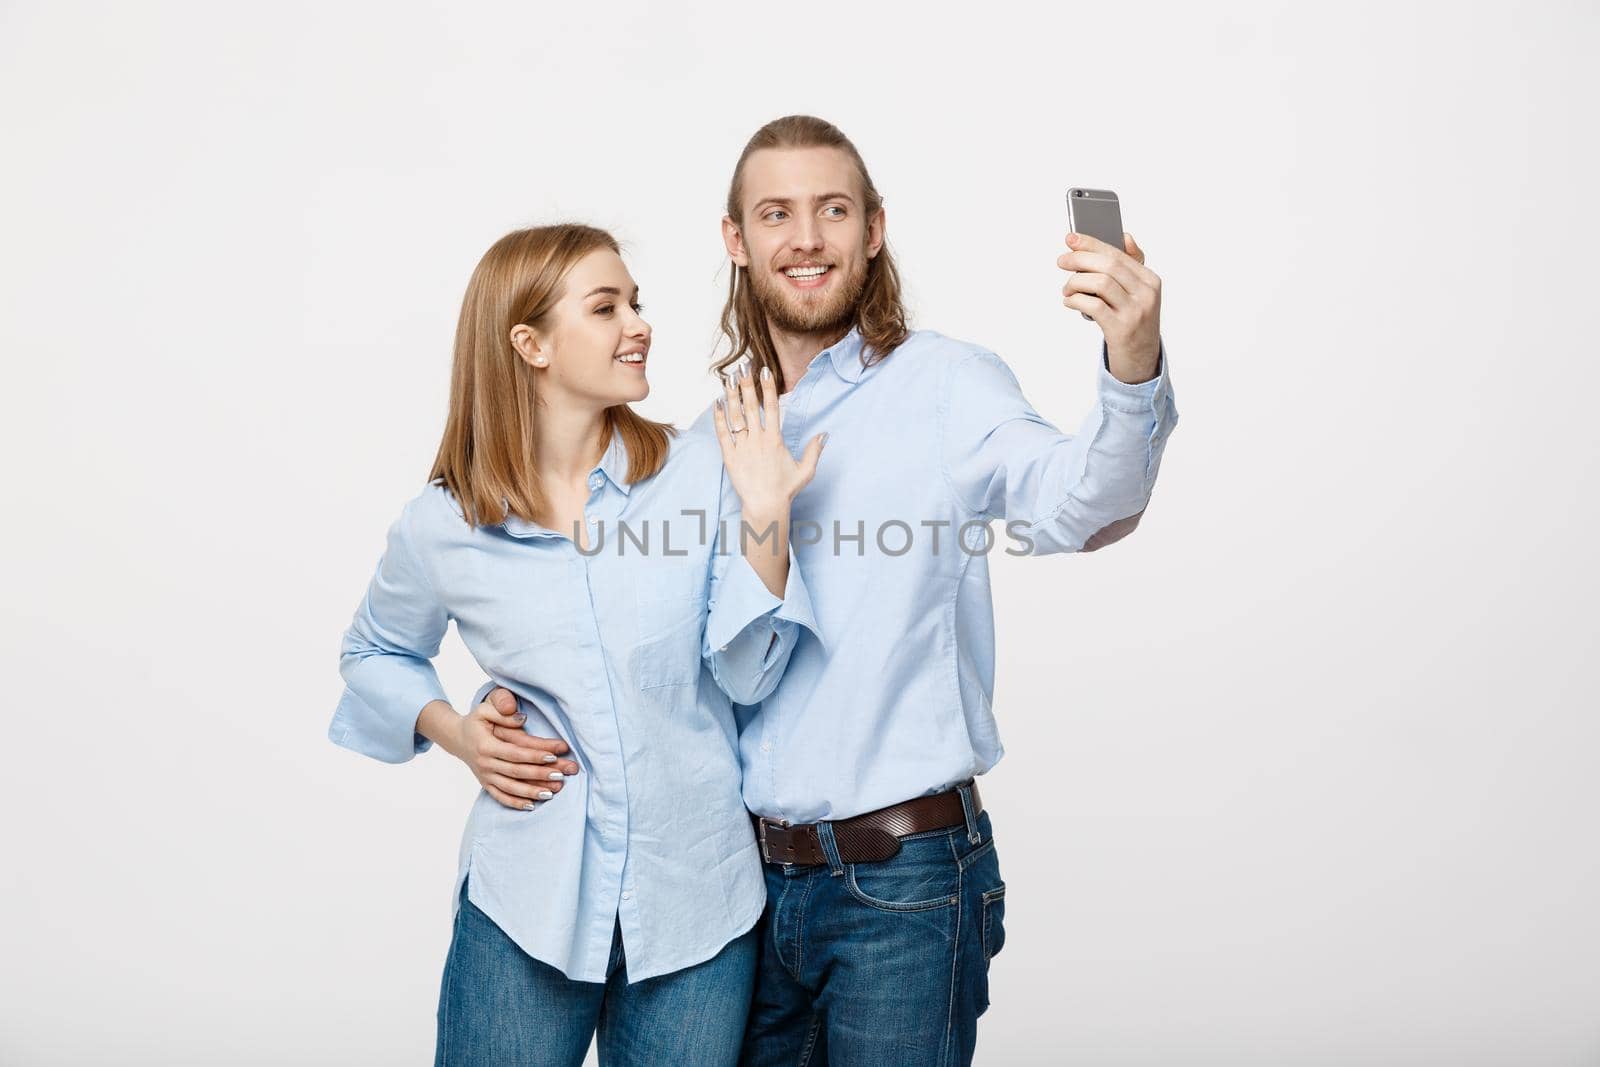 Joyful young loving couple making selfie on camera while standing in white studio background